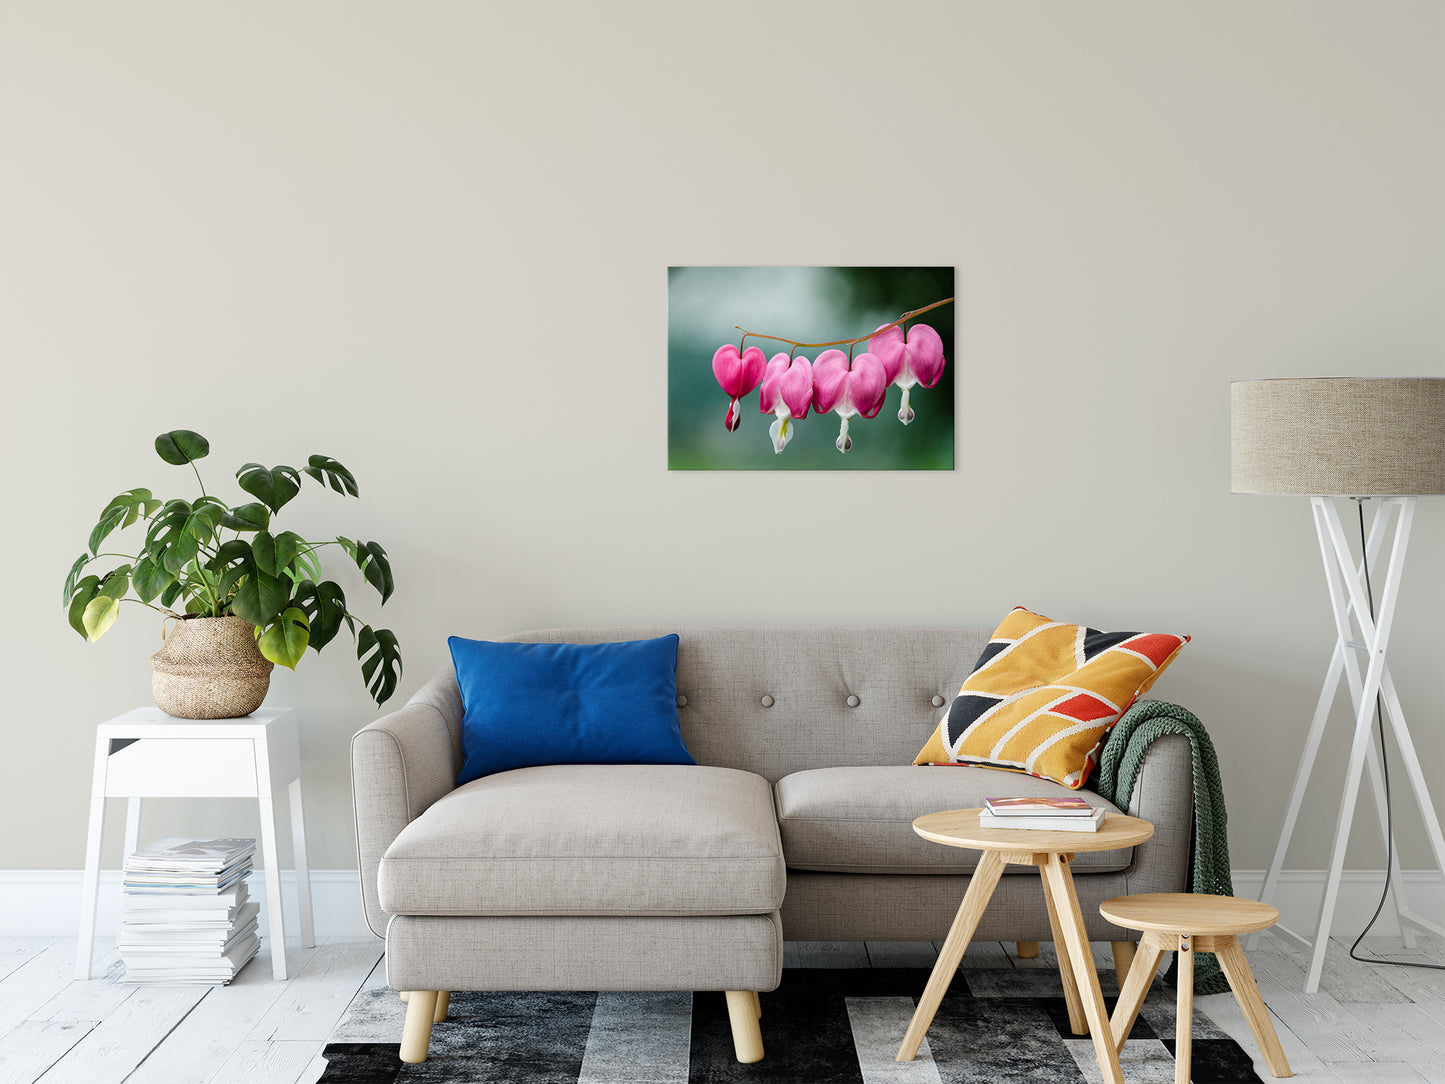 Canvas Wall Art For Living Room: Be Still My Bleeding Heart Nature / Floral Photo Fine Art Canvas Wall Art Prints 20" x 30" - PIPAFINEART